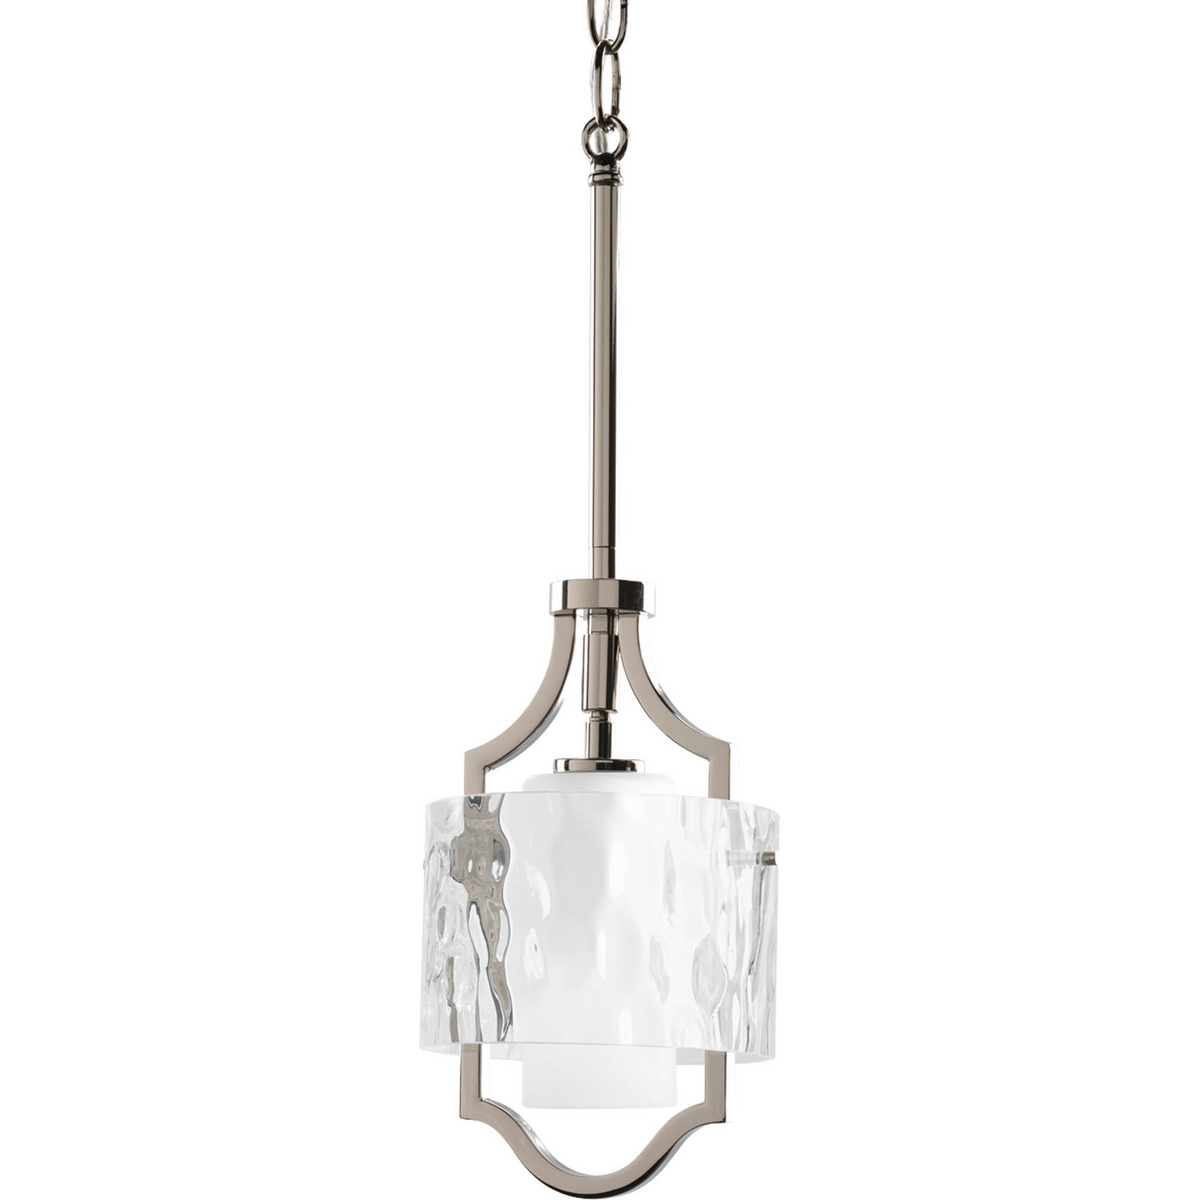 One-light pendant/semi-flush convertible fixture with bulb. Caress features a chic, sophisticated one-light semi-flush featuring a Polished Nickel metal frame with layered glass diffusers to cast a glimmering light. An outer shade of clear, water glass adds rich texture and playful reflections from a central etched glass diffuser.